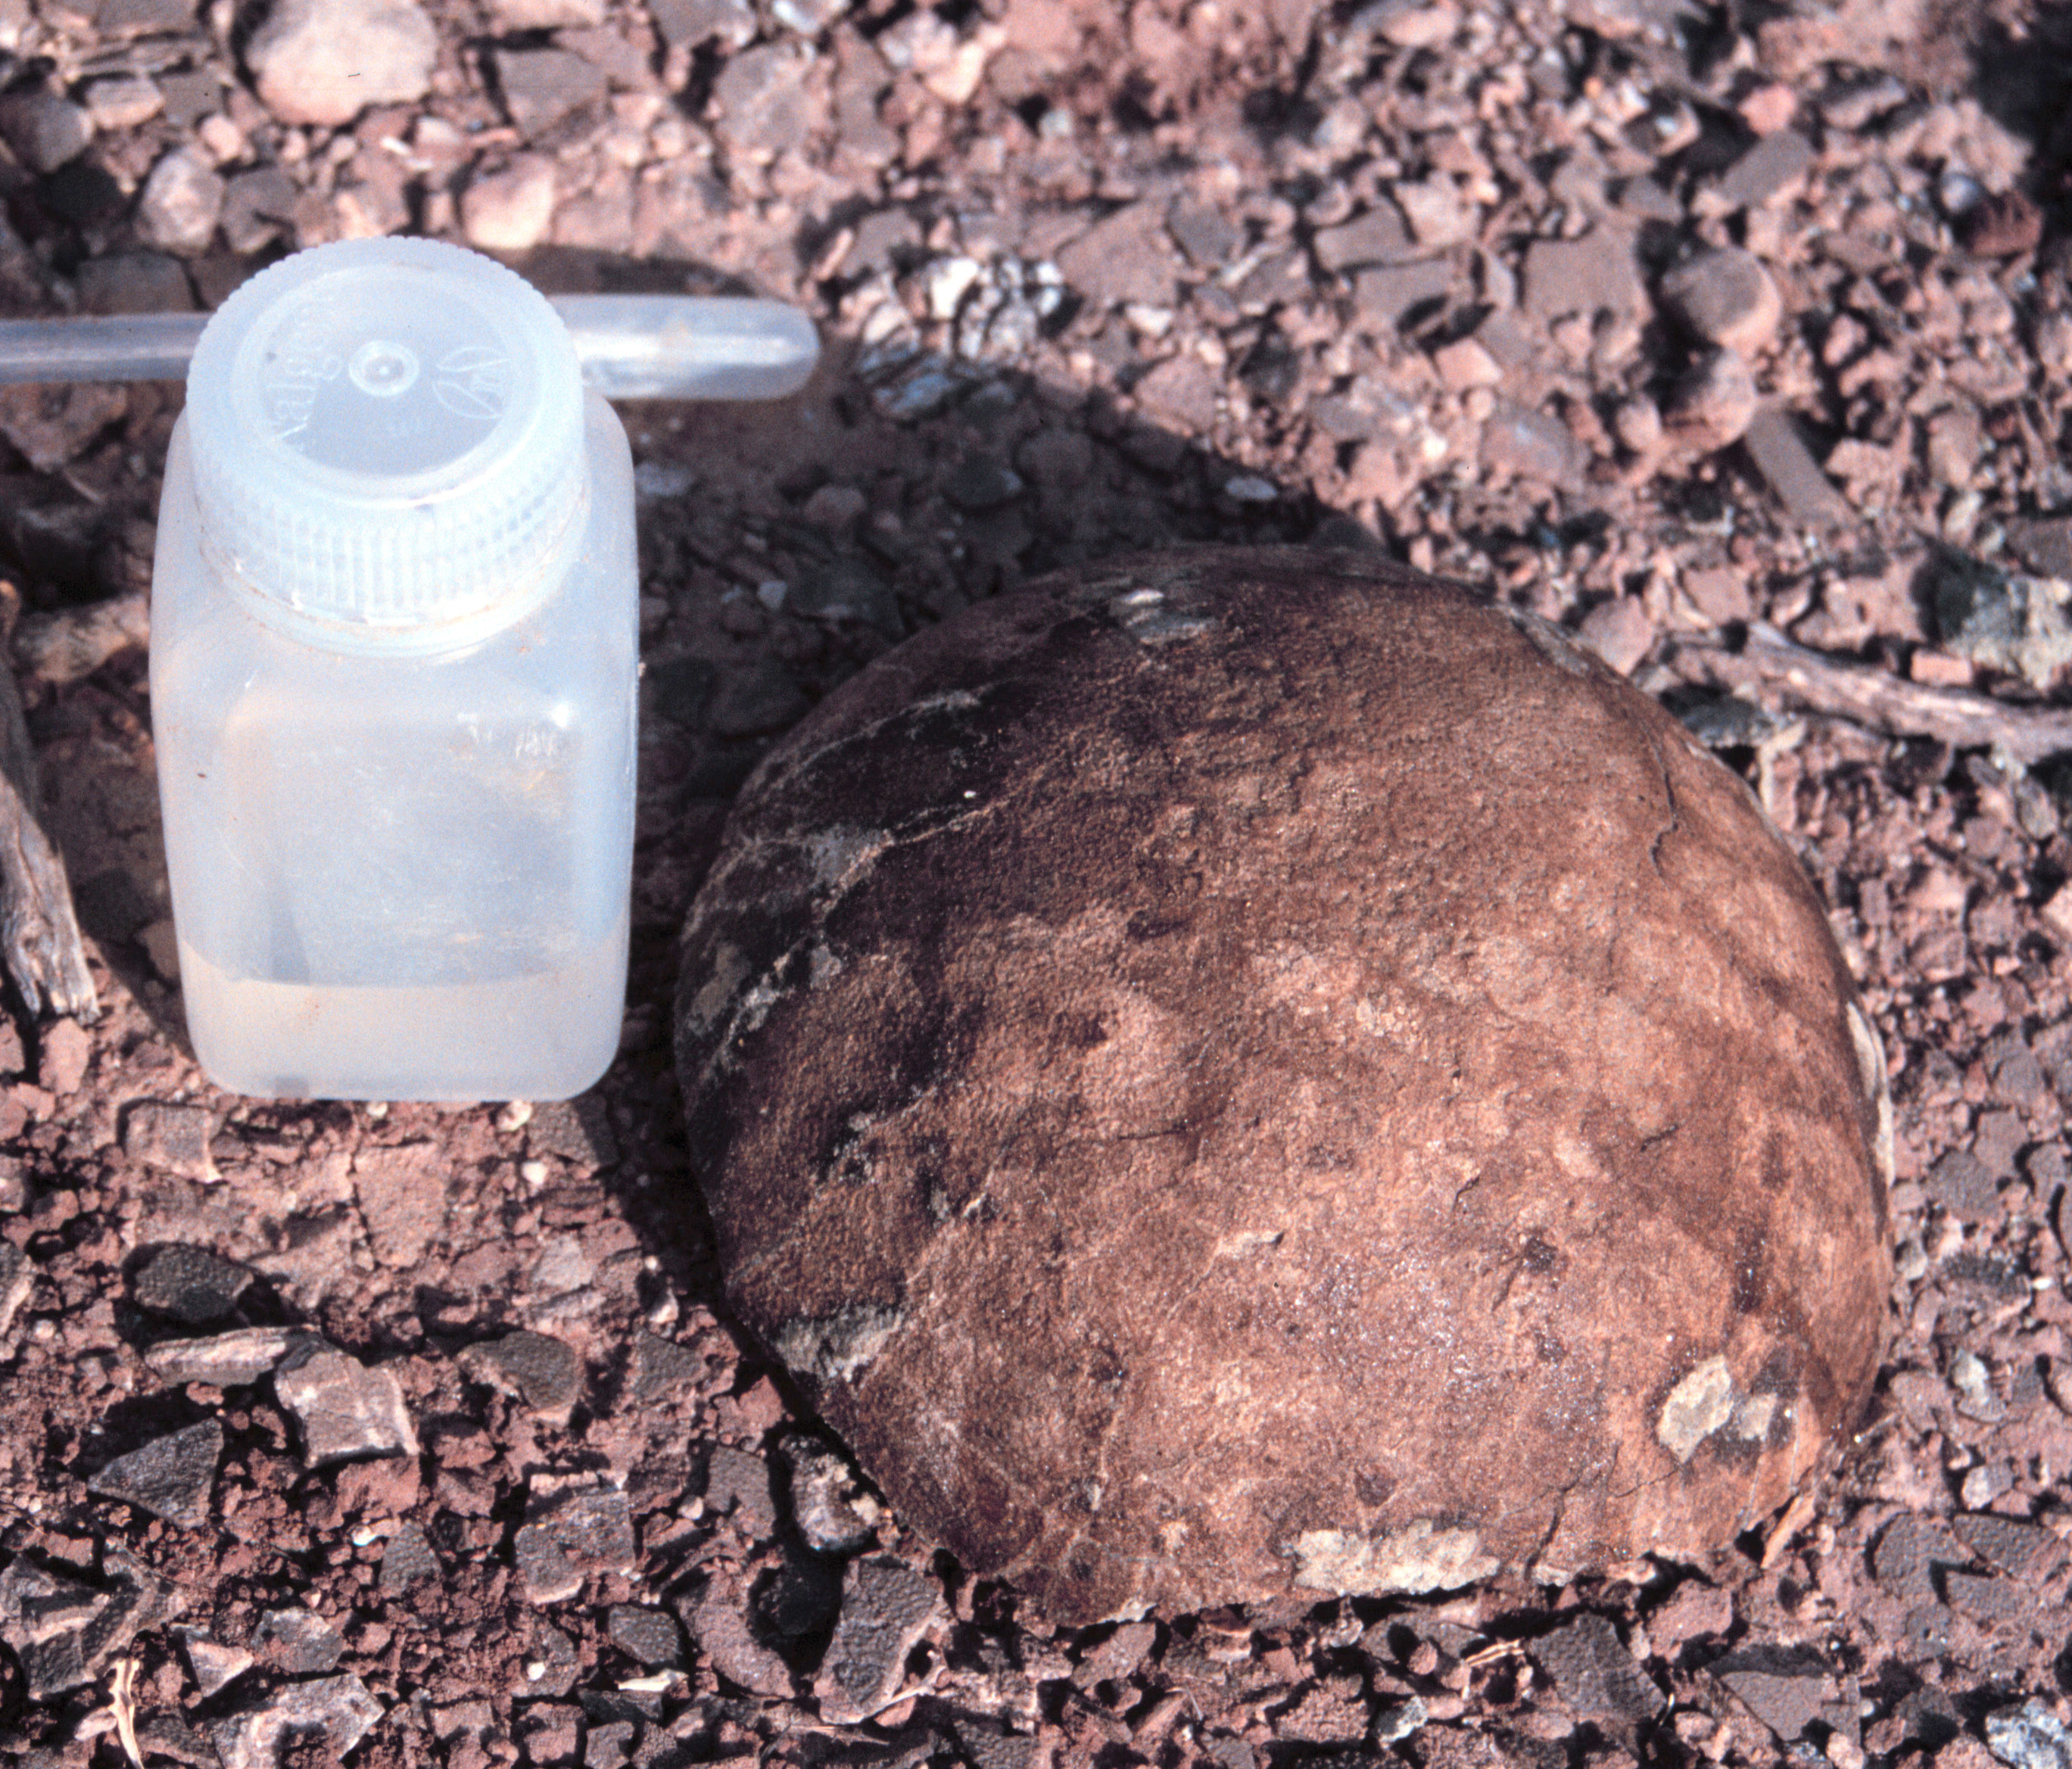 The key to new discoveries lies in this titanosaur egg, a remnant of the long-ago past.